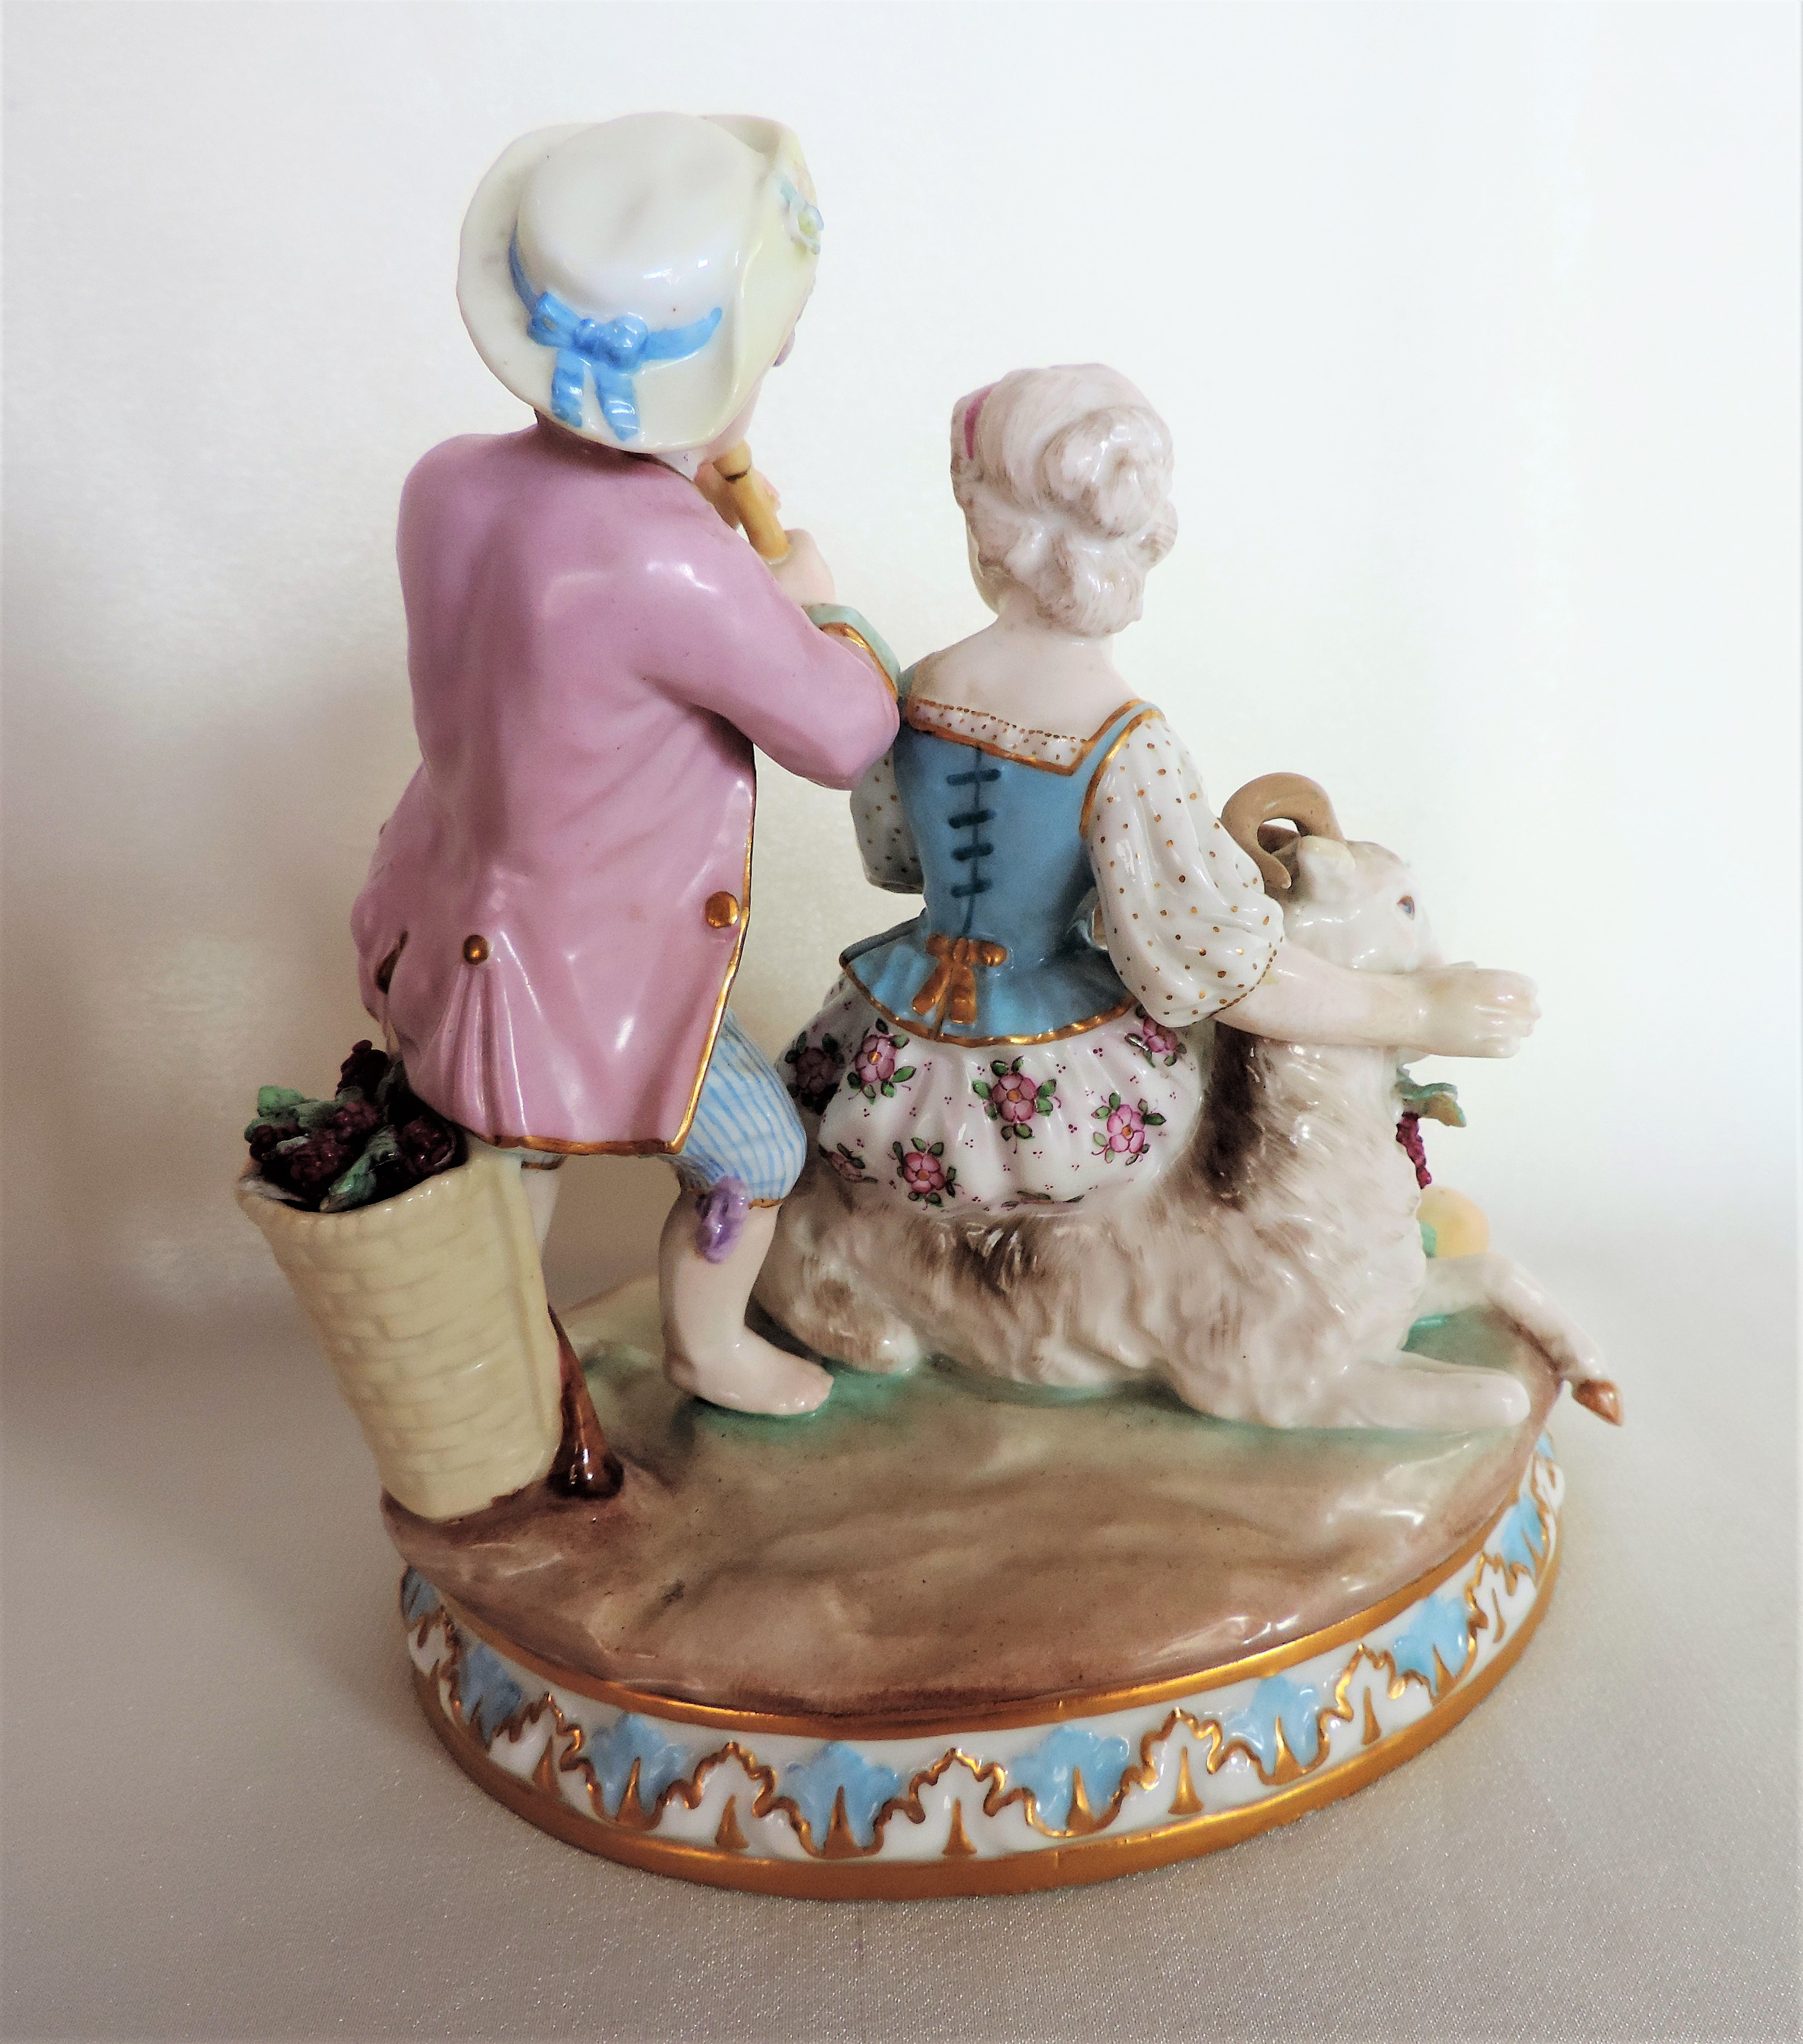 Antique German Porcelain Figurine in the Meissen Style - Image 2 of 8